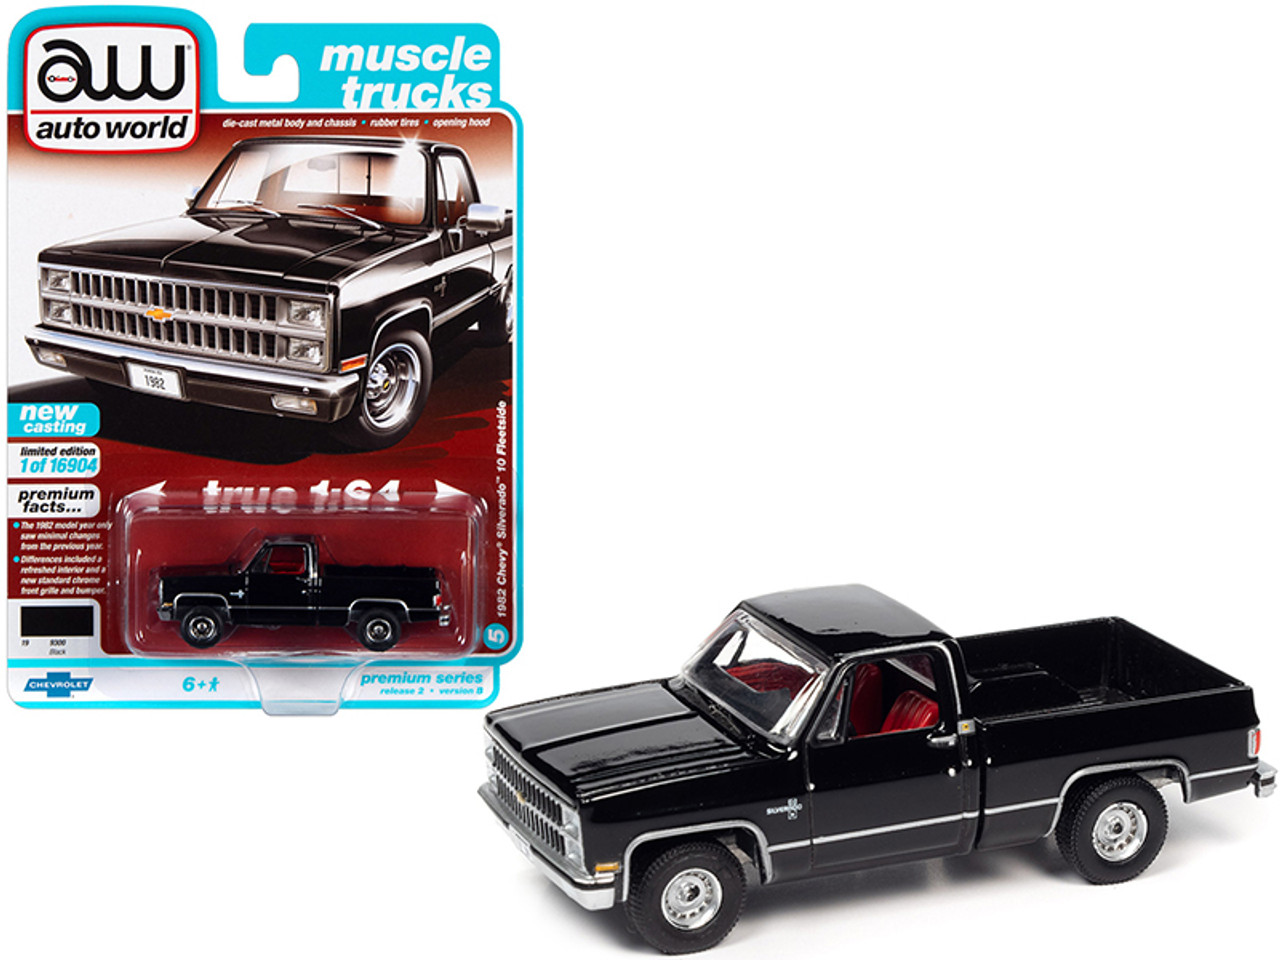 1982 Chevrolet Silverado 10 Fleetside Pickup Truck Black with Red Interior "Muscle Trucks" Limited Edition to 16904 pieces Worldwide 1/64 Diecast Model Car by Autoworld